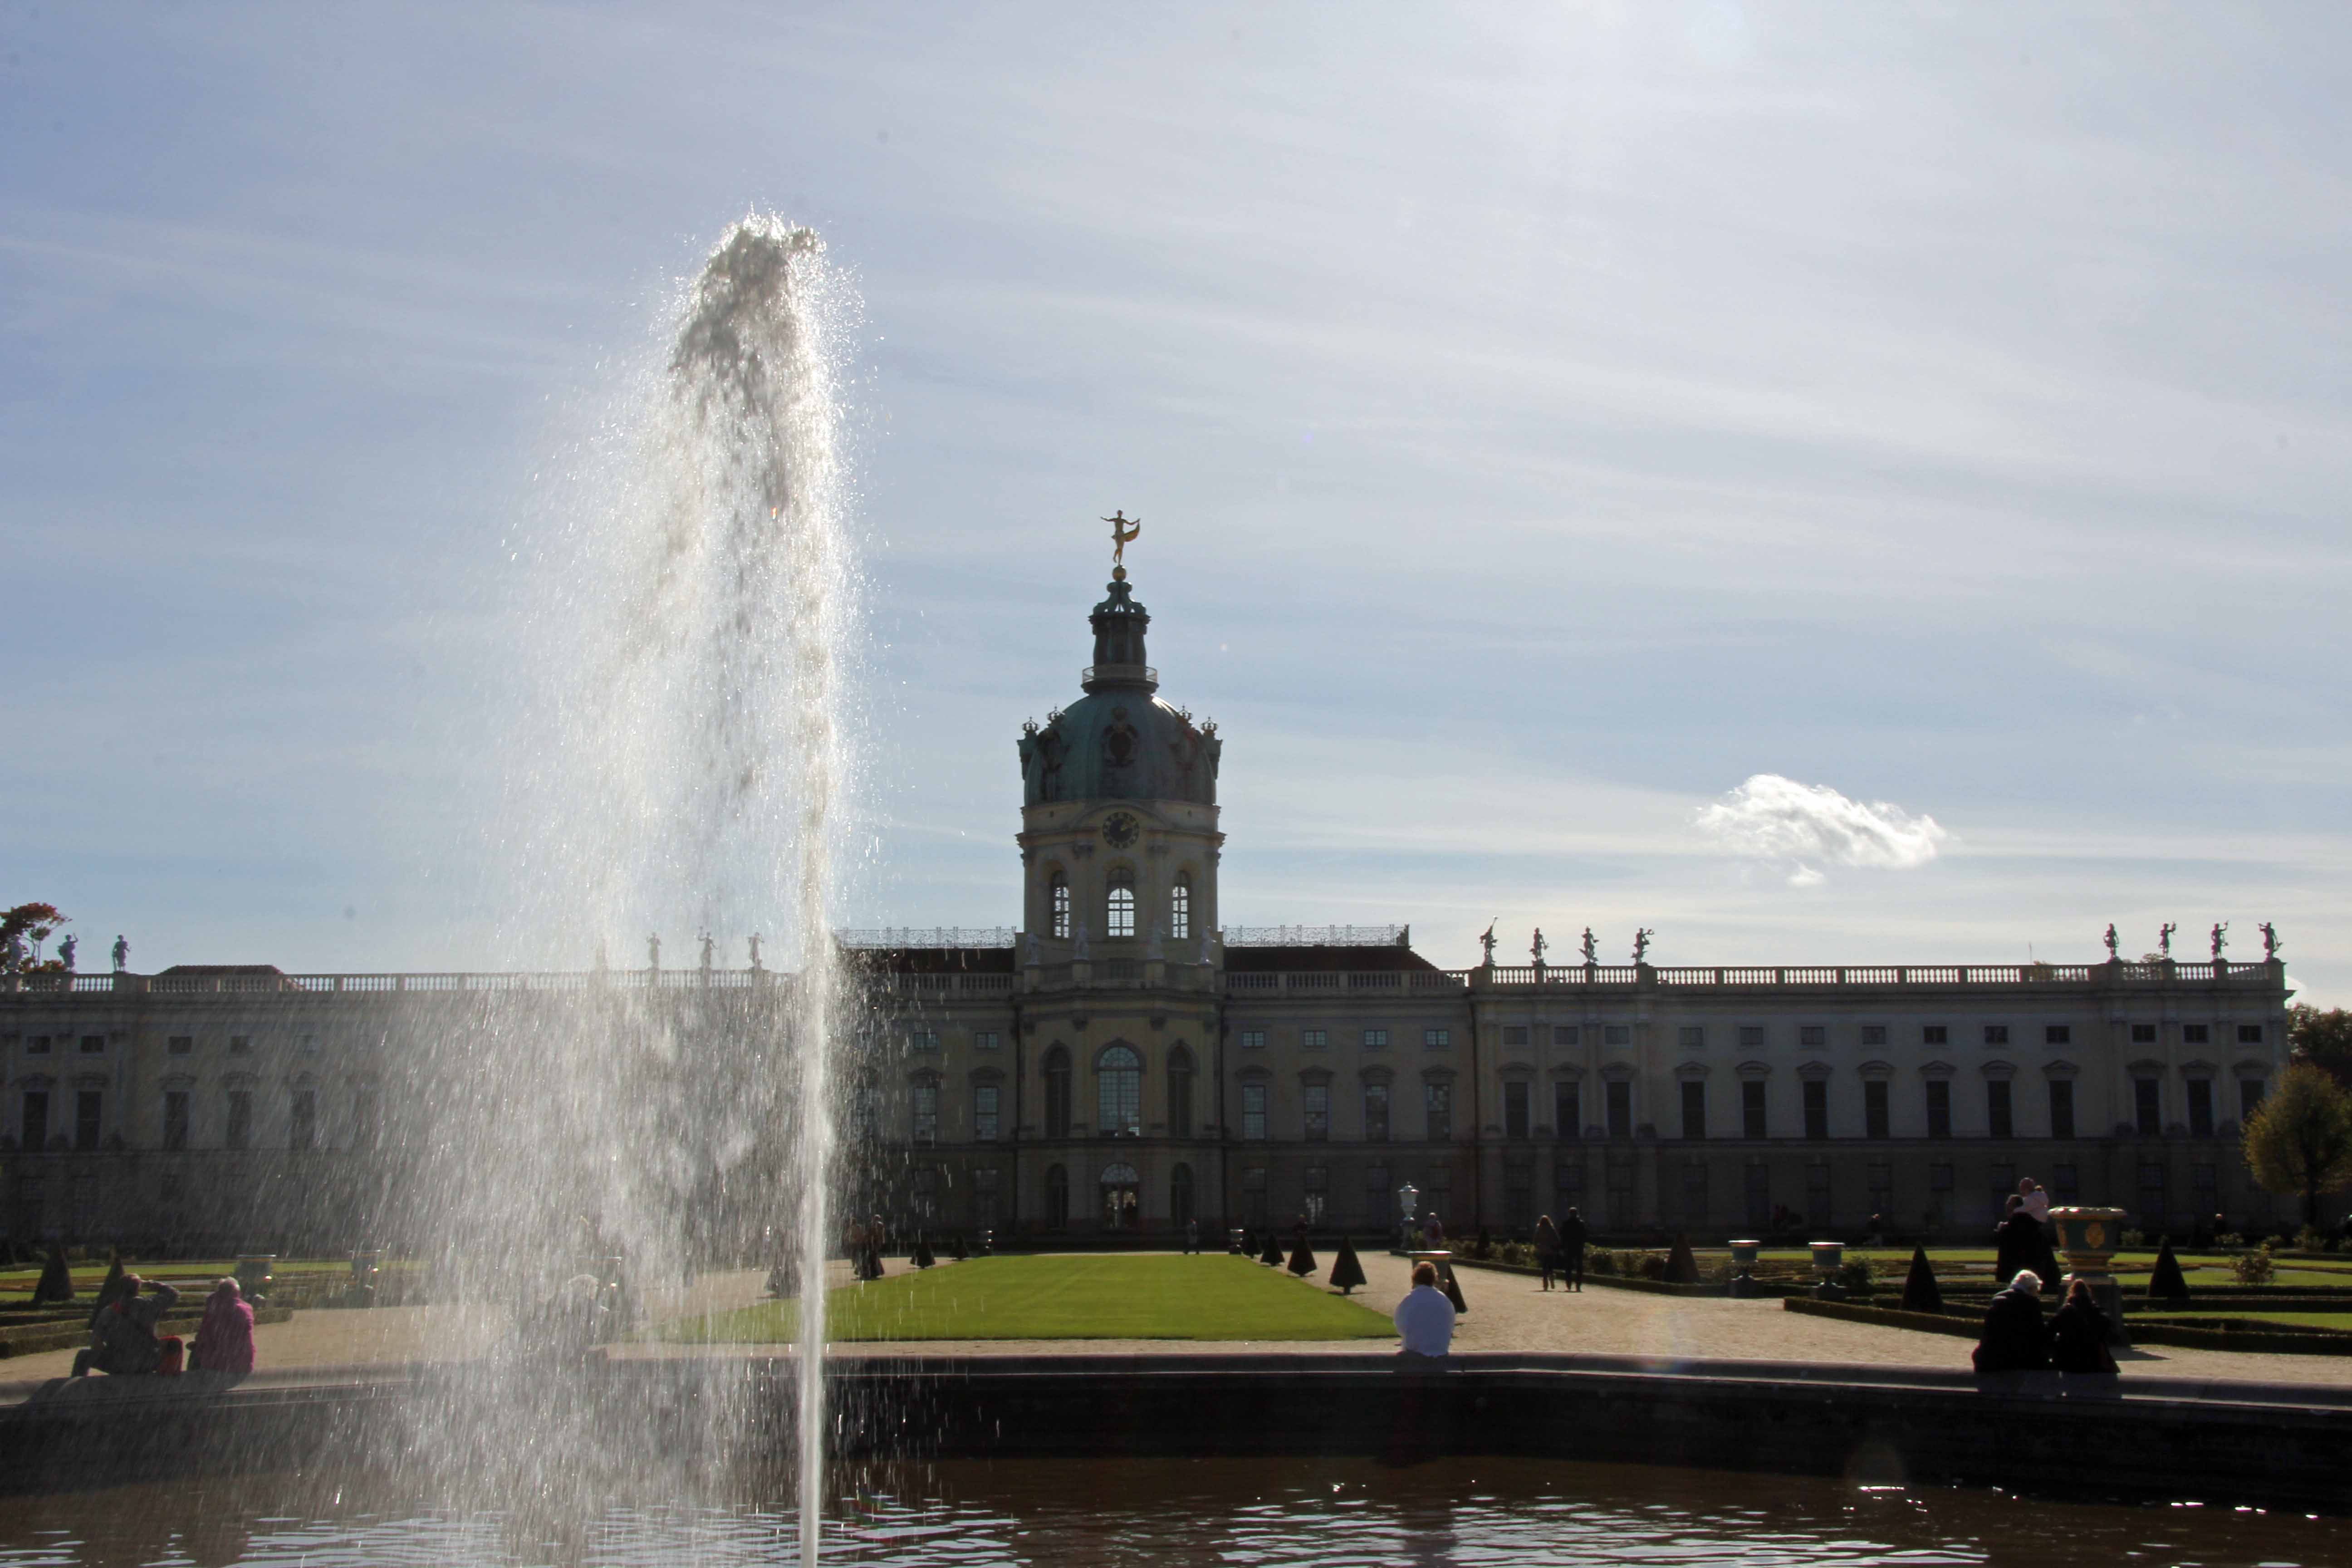 Schloss Charlottenburg in Berlin seen from the fountain in The Palace Gardens